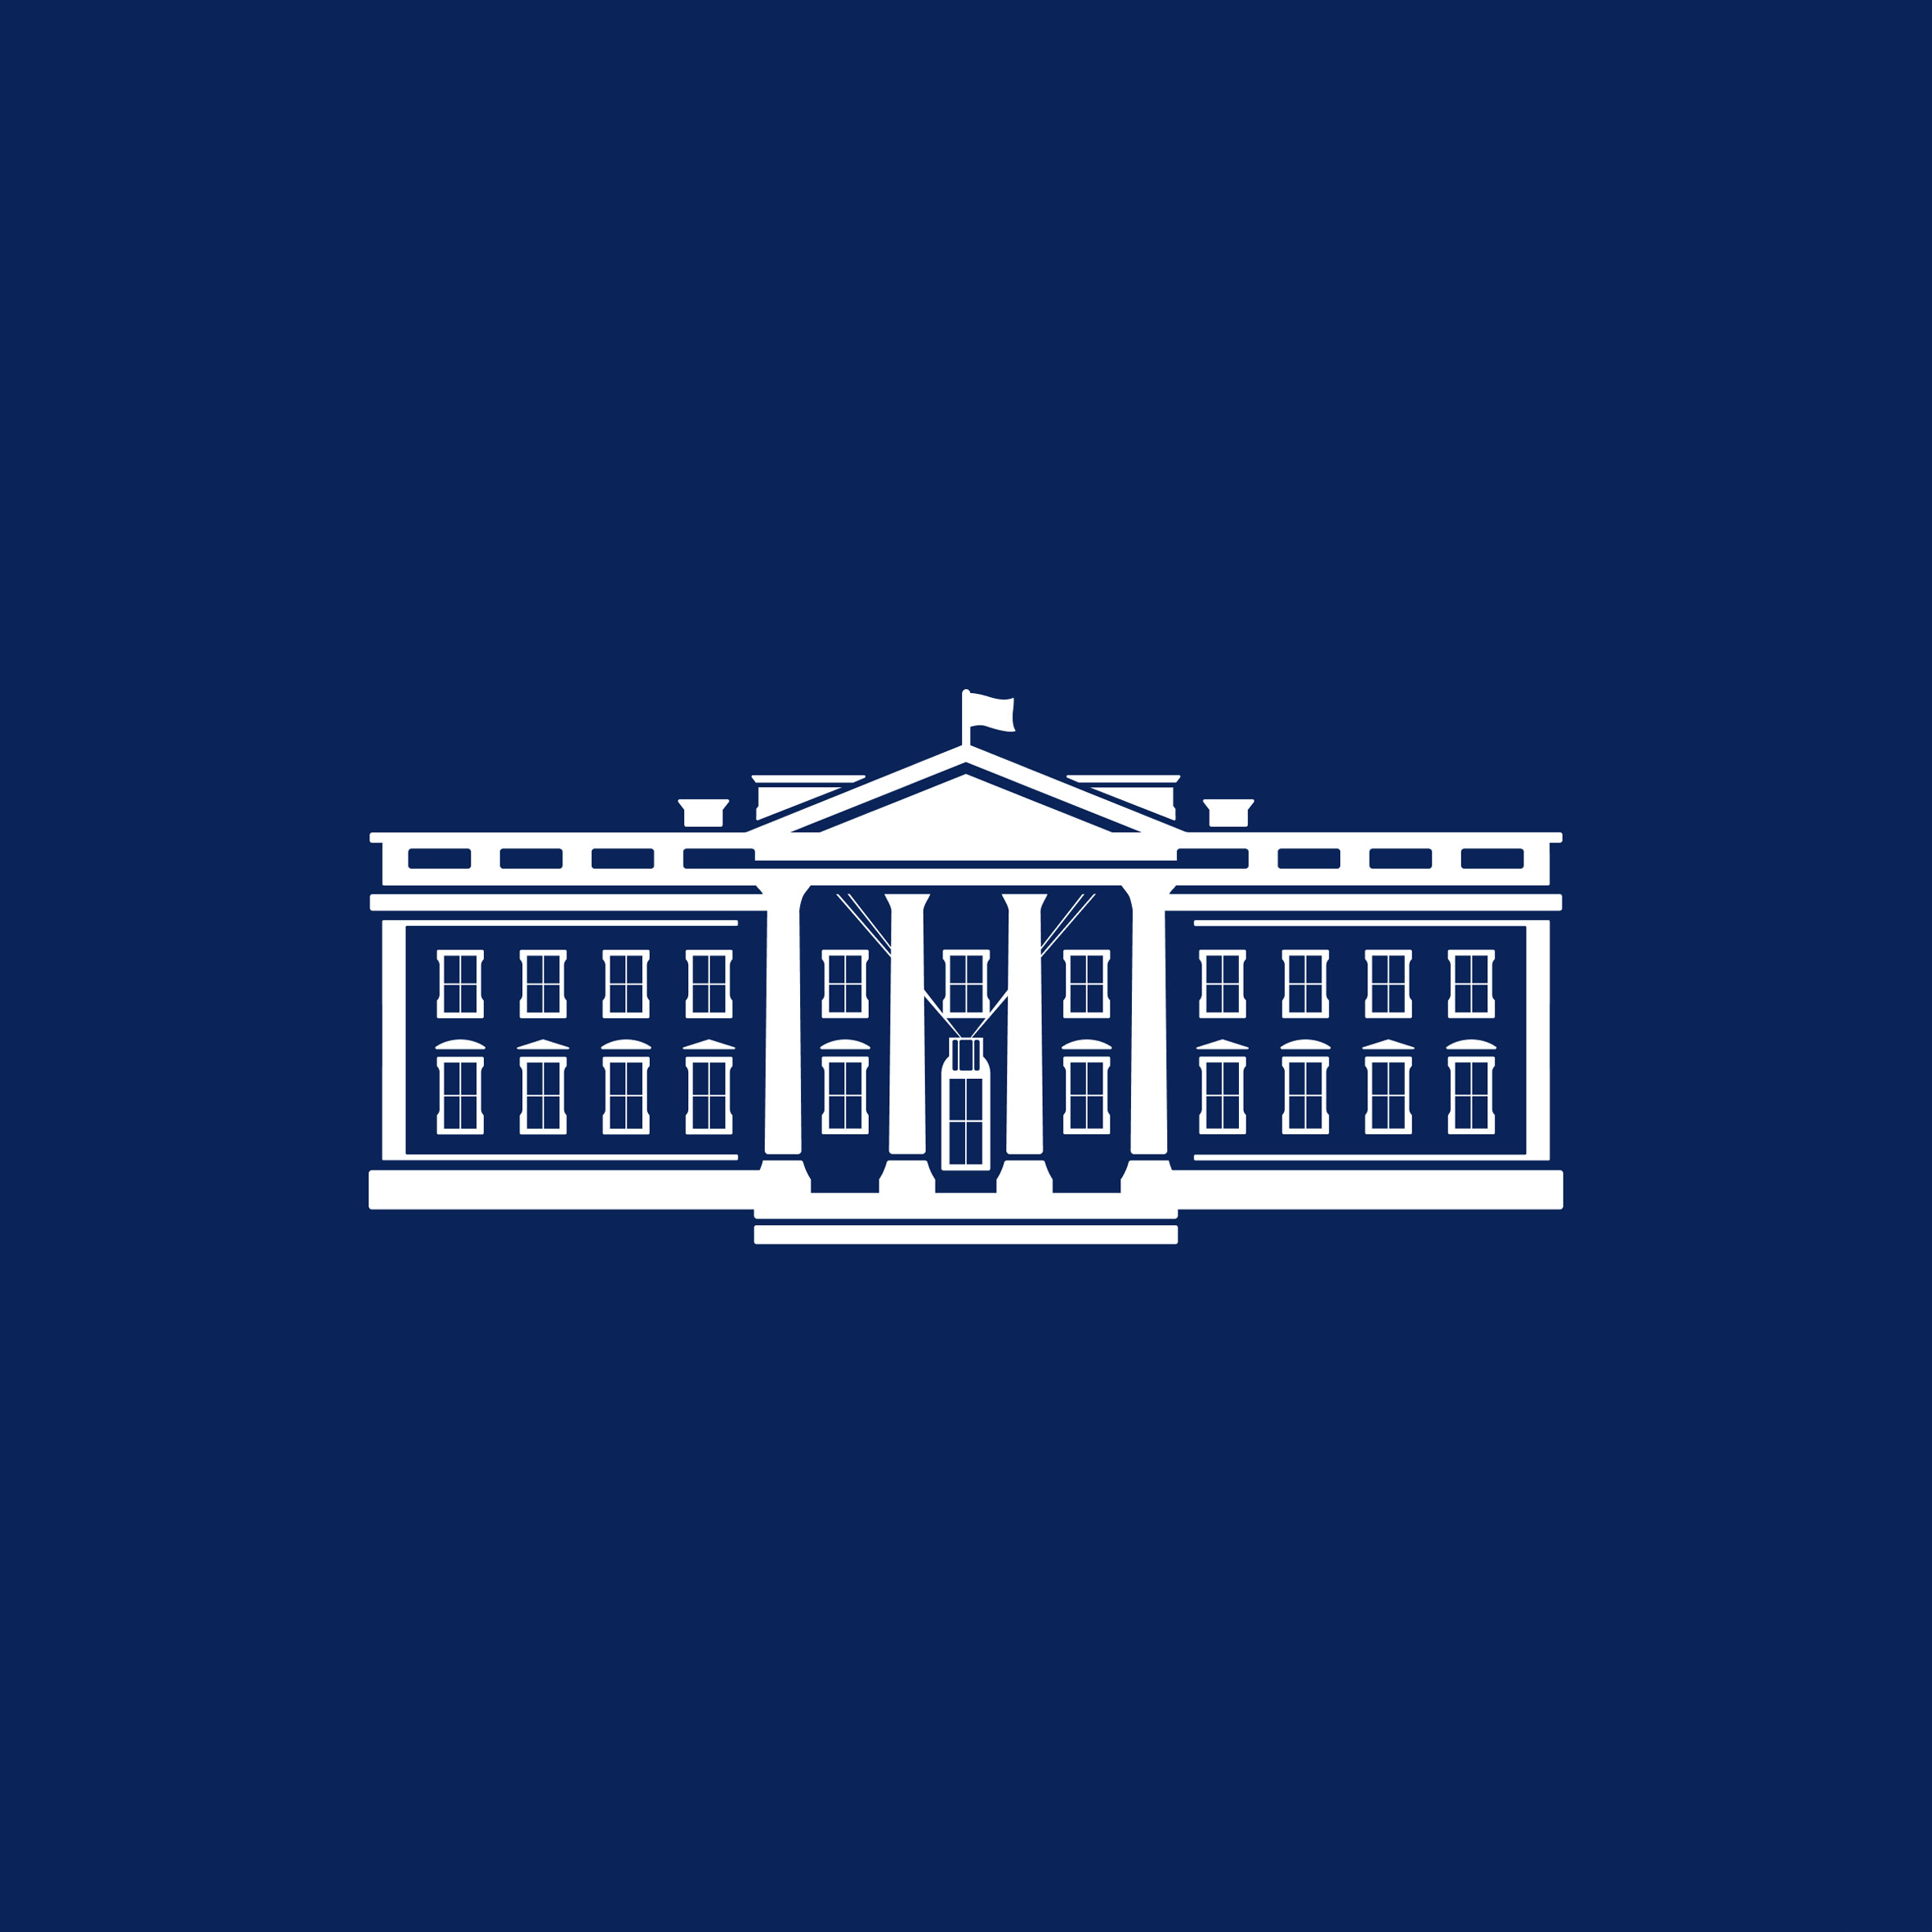 White House logo redesign by Wide Eye